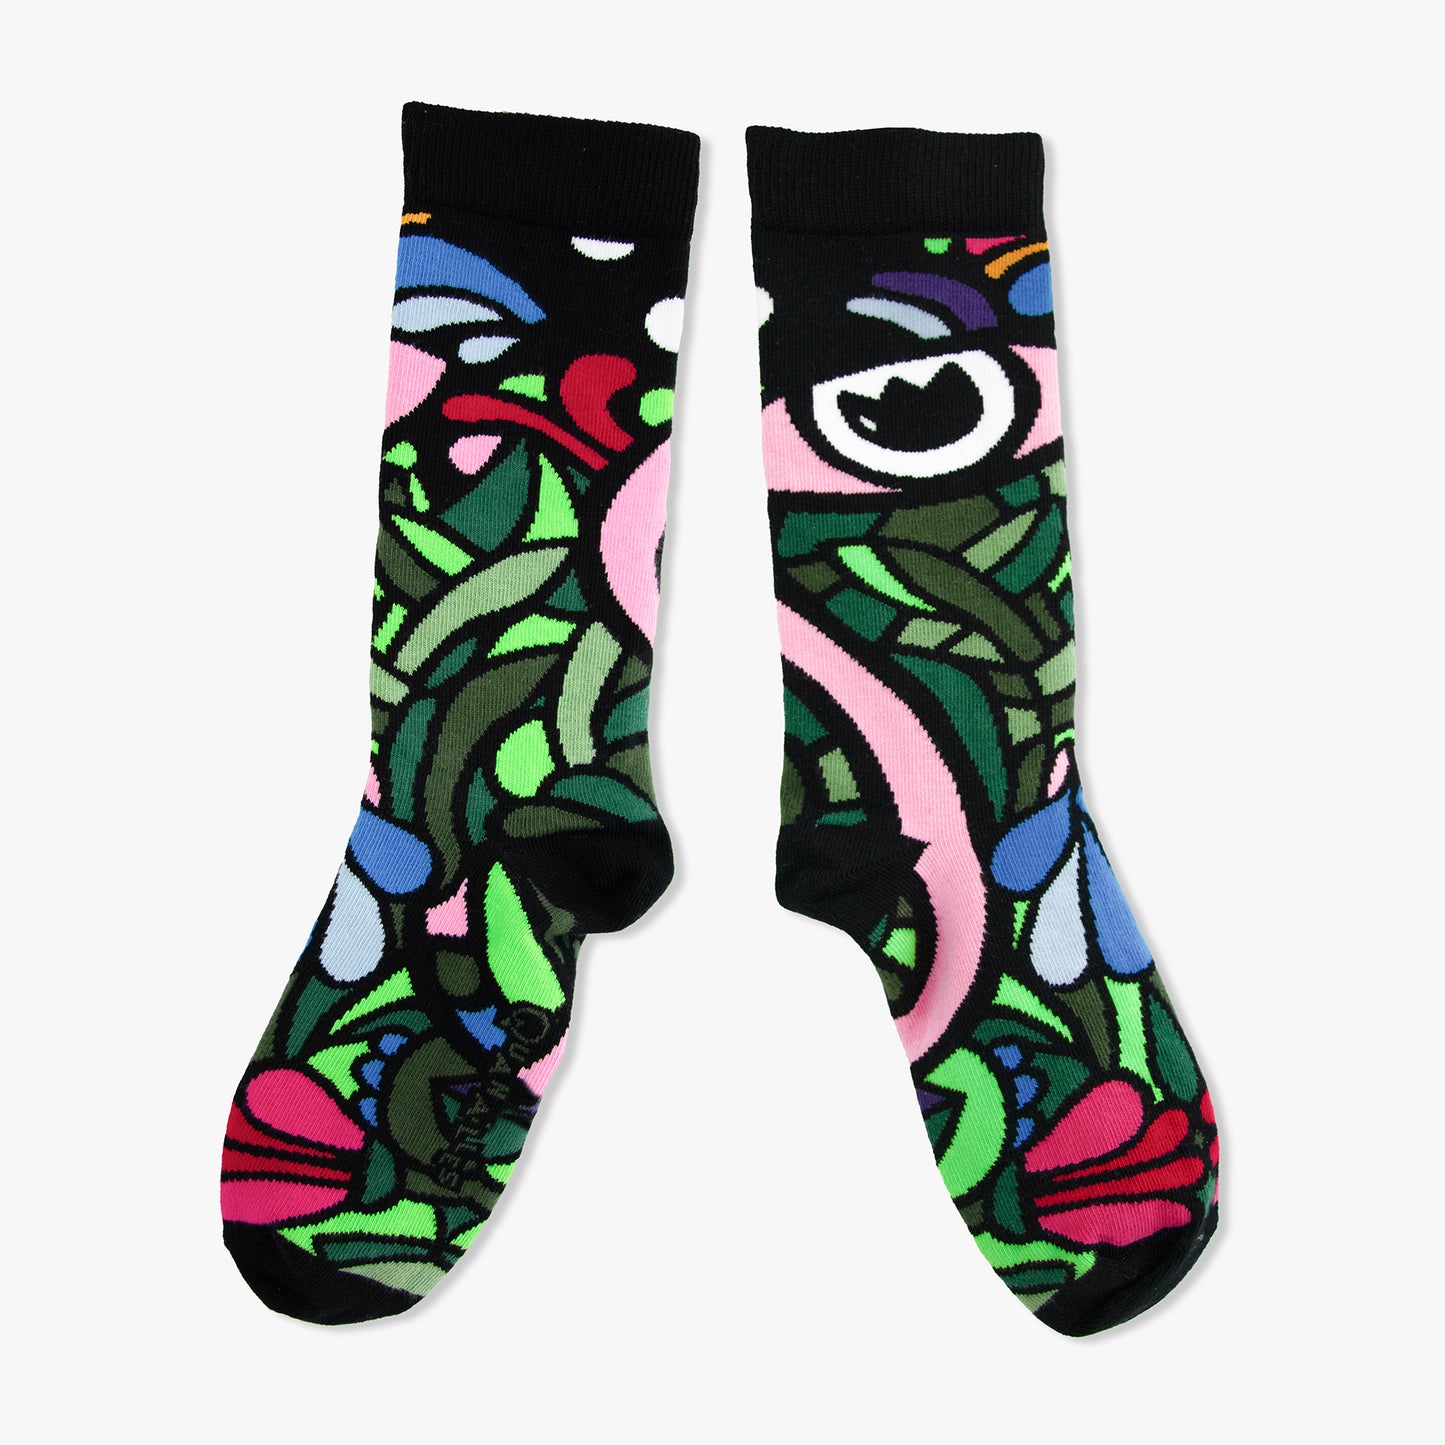 Chaussettes made in france bollywood multicolor vert rose noir